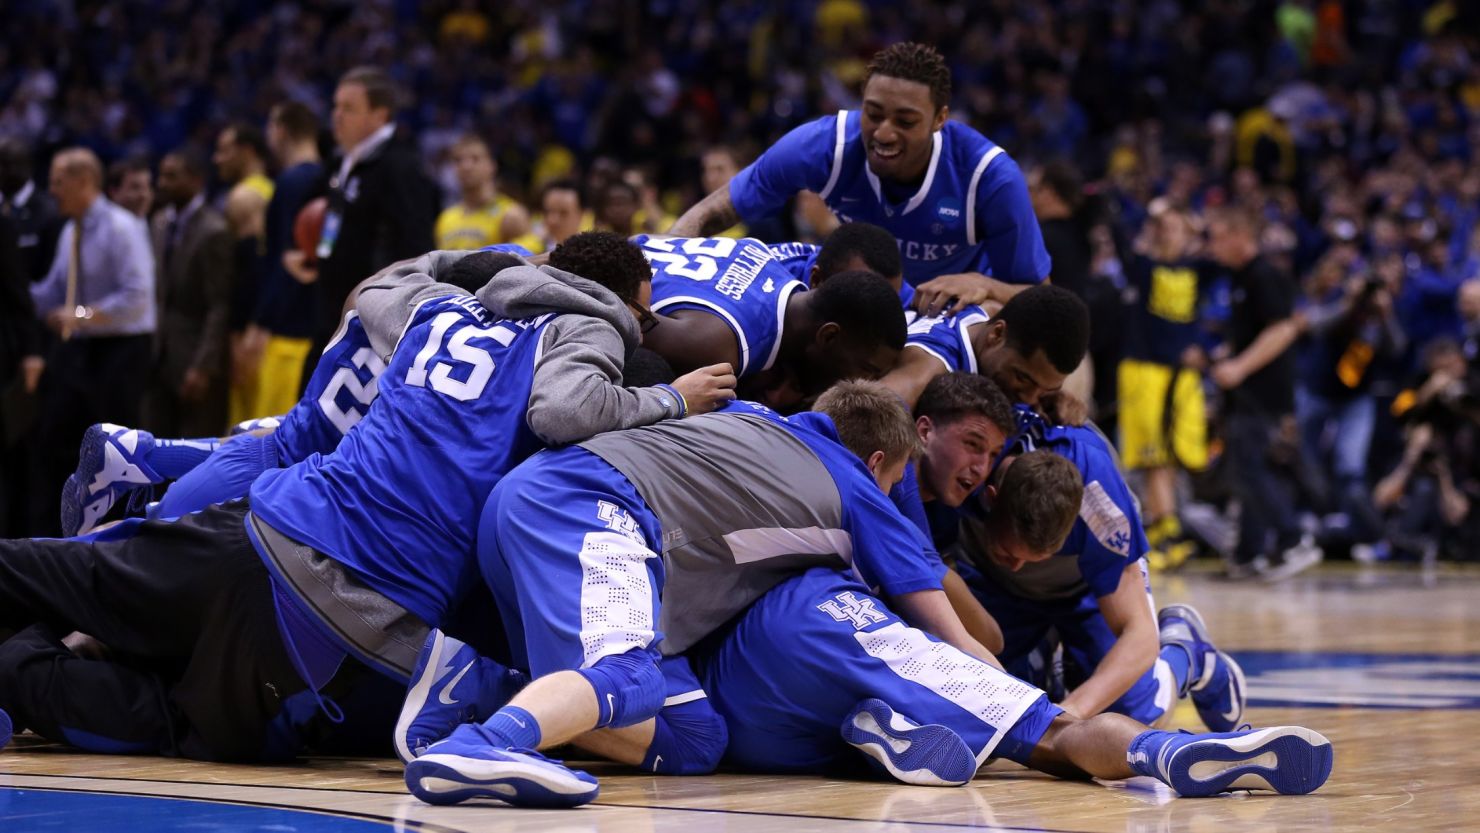 Kentucky, the No. 8 seed in its region, celebrates after freshman Aaron Harrison's late 3-pointer held up for the win.